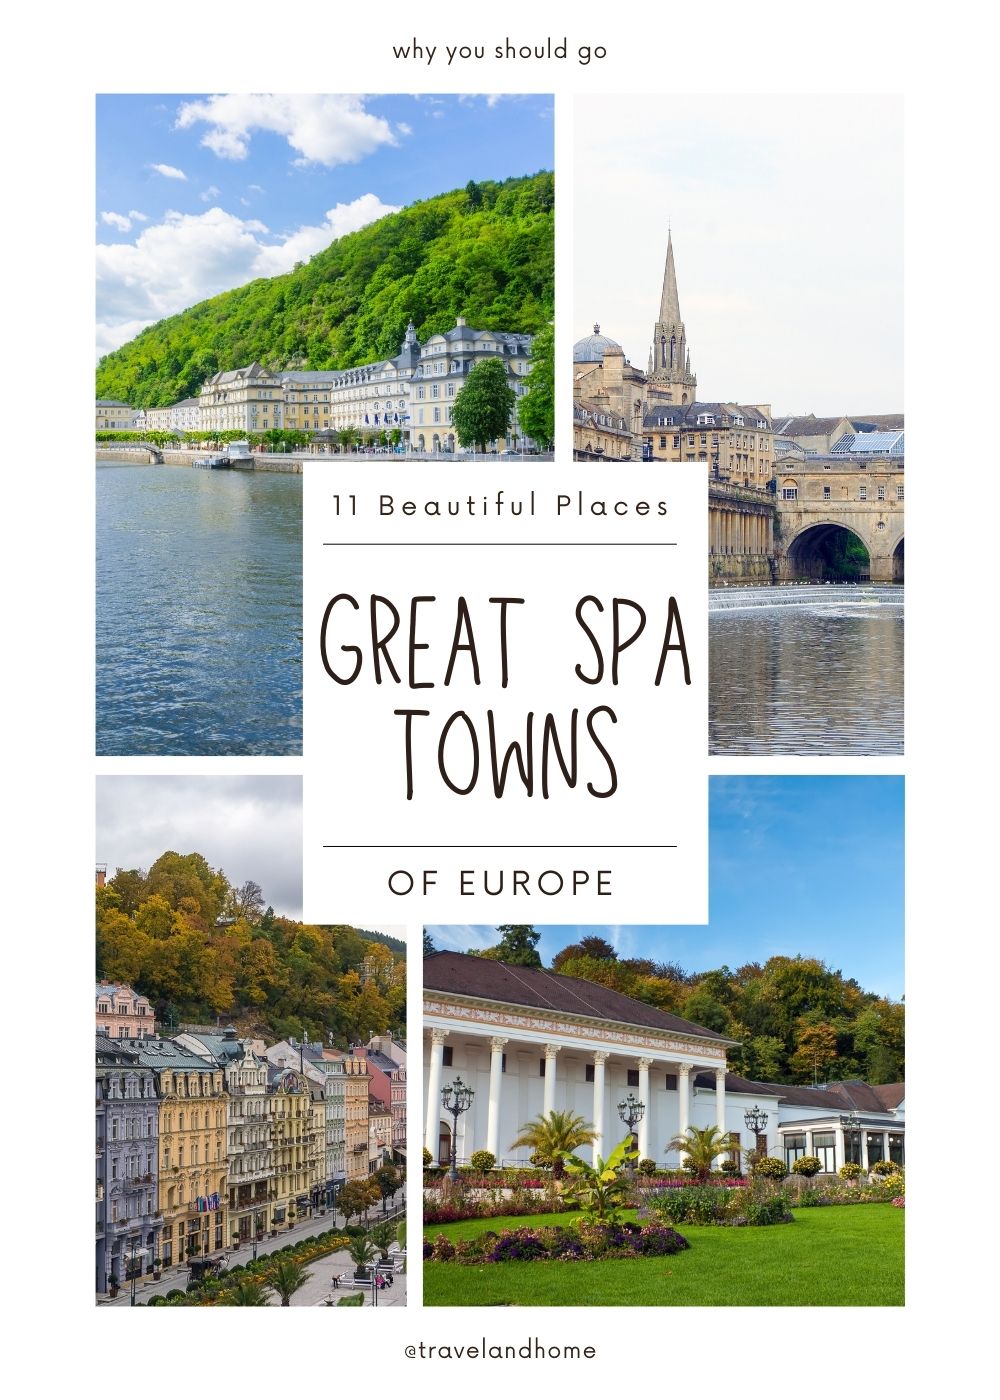 Great spa towns in Europe why you should visit where to stay what do they have to offer is it worth going beautiful spa hotels